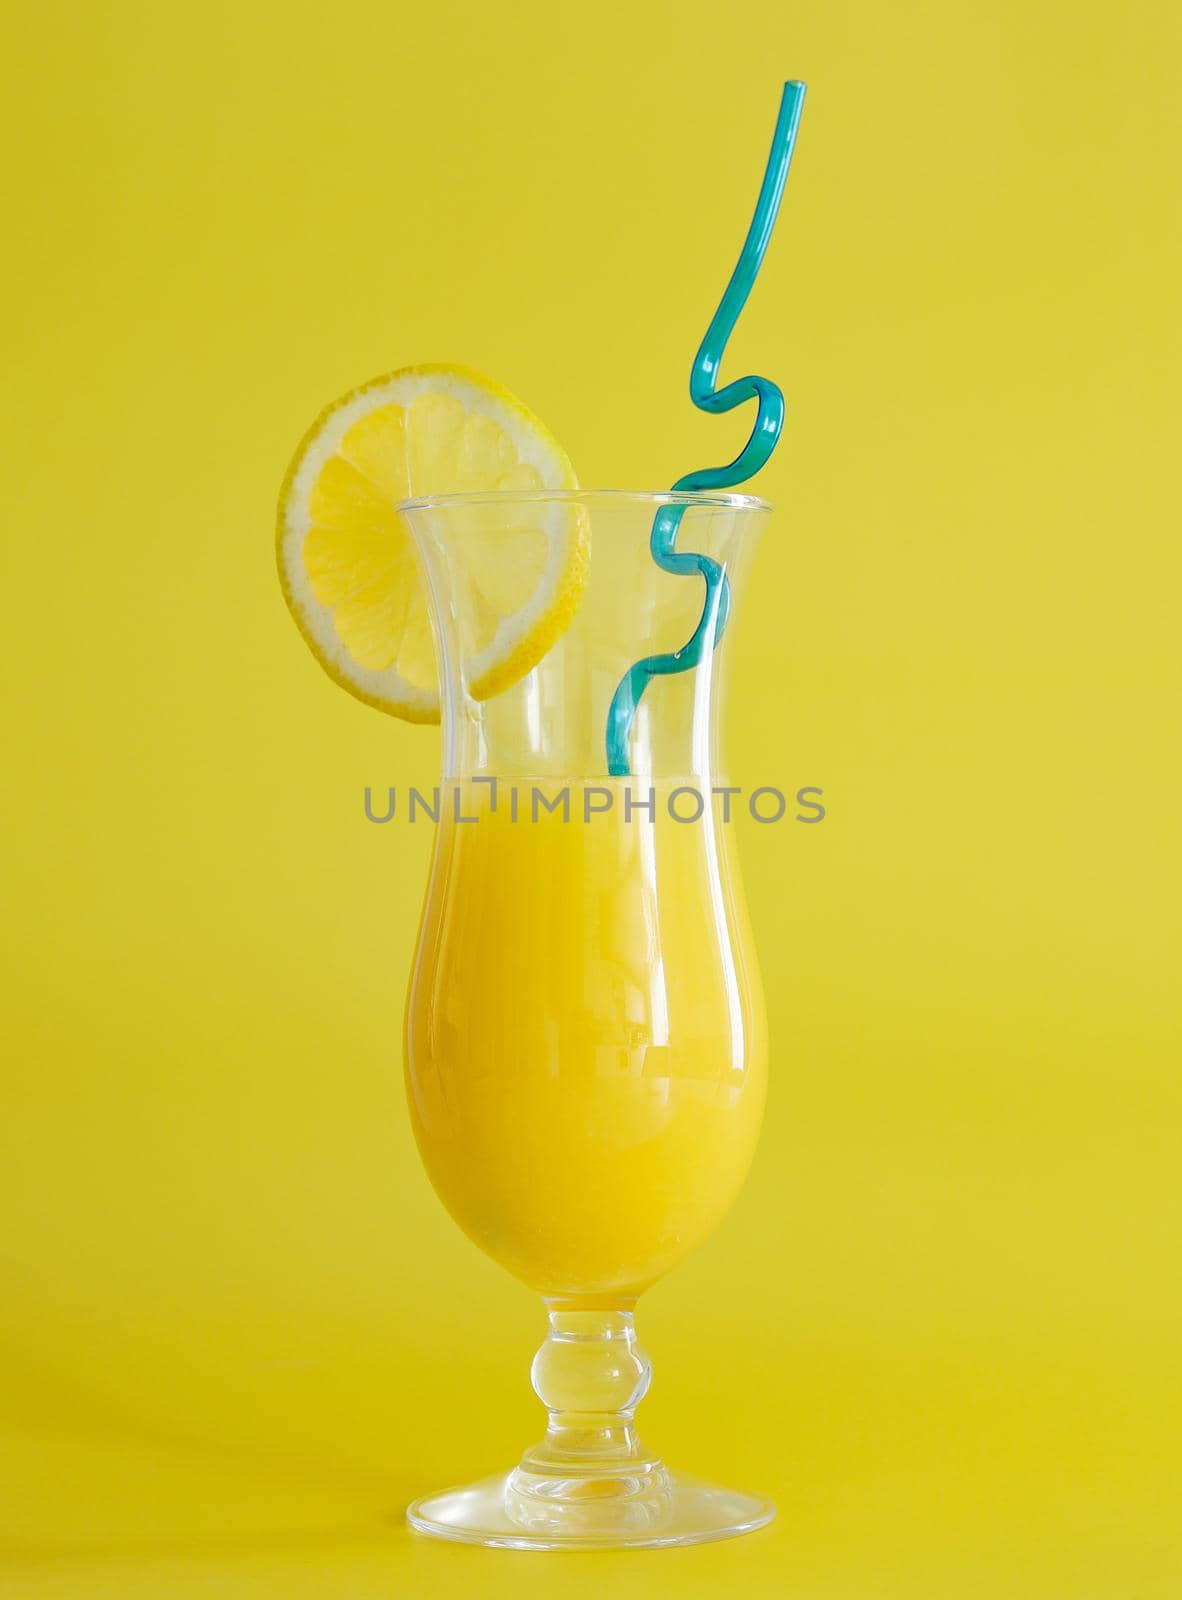 Fresh orange juice in glass, decorated with slice of lemon and blue straw. Summer cocktail on the yellow background. Colorful design